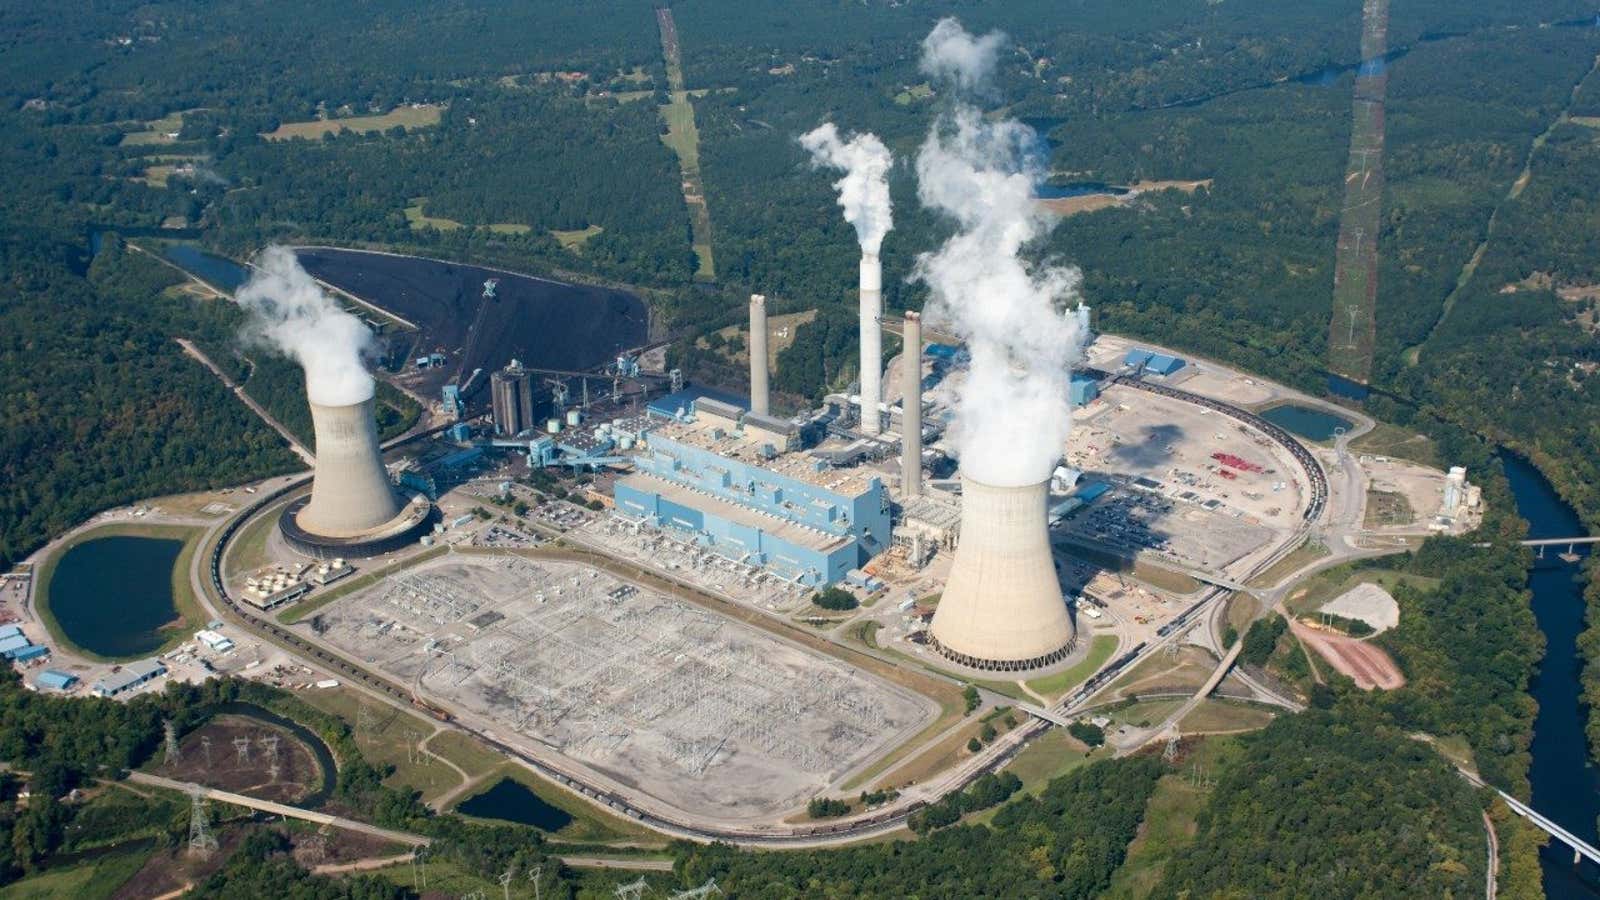 Alabama’s James H Miller Jr coal plant is one of the largest emitters of carbon dioxide in the US